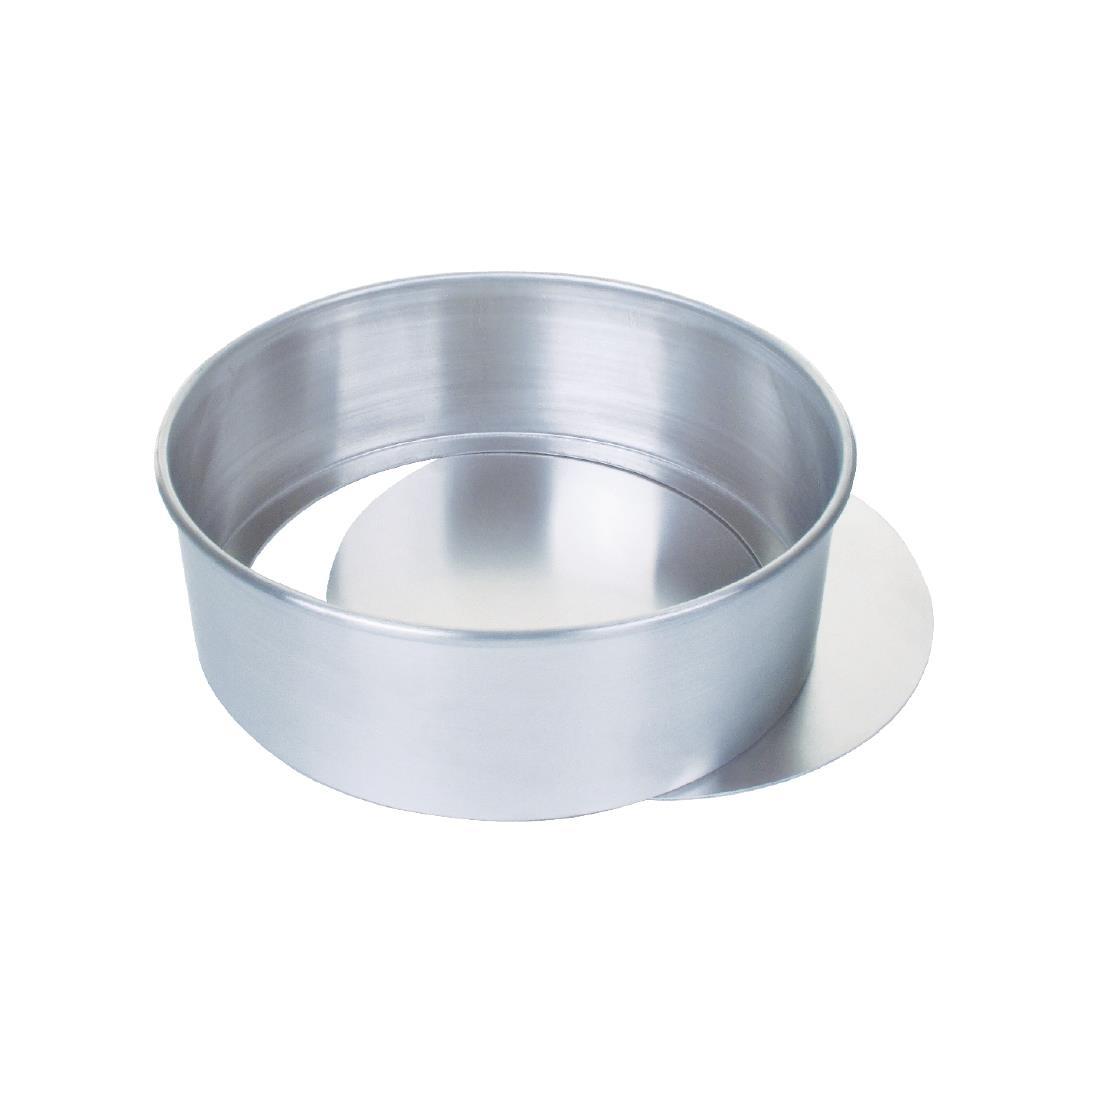 Aluminium Cake Tin With Removable Base 230mm - CE089  - 1